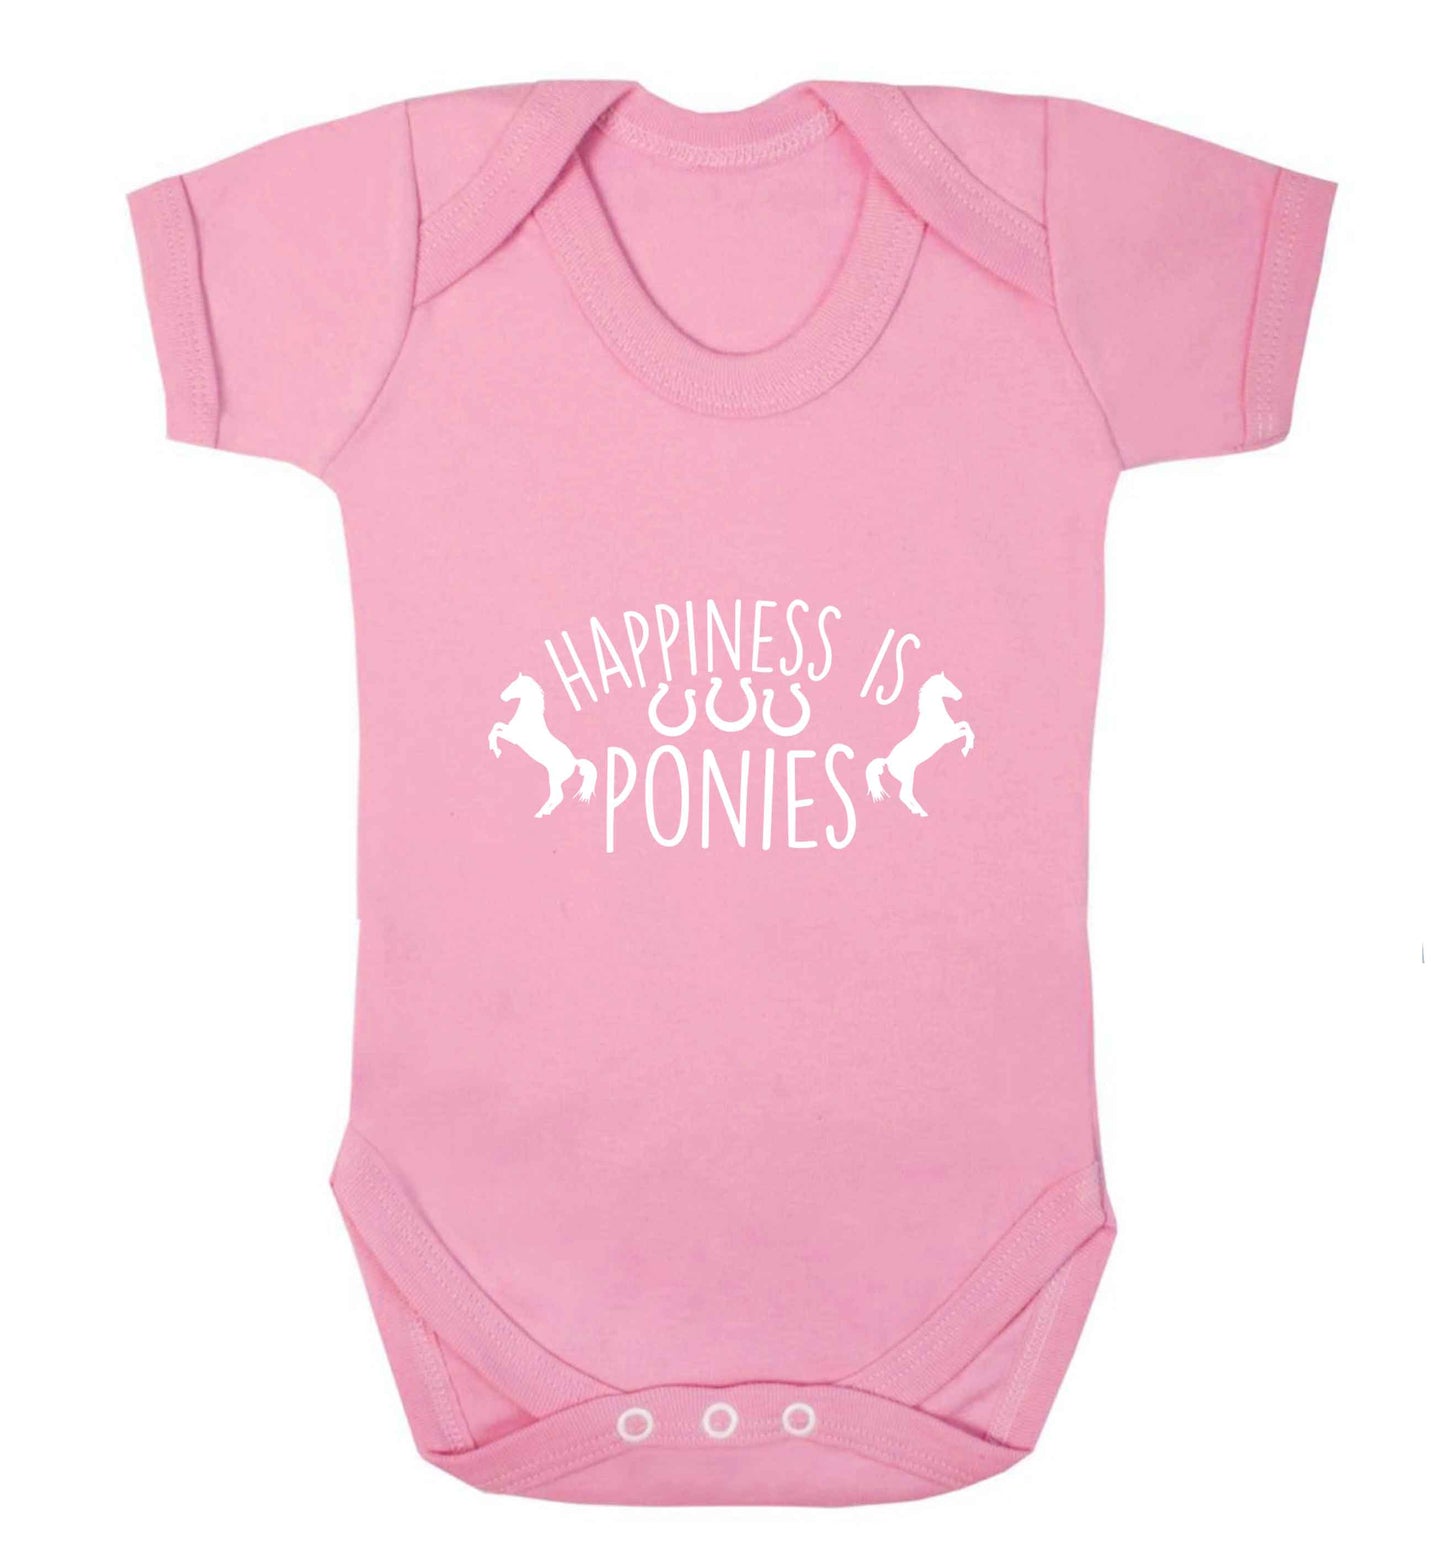 Happiness is ponies baby vest pale pink 18-24 months